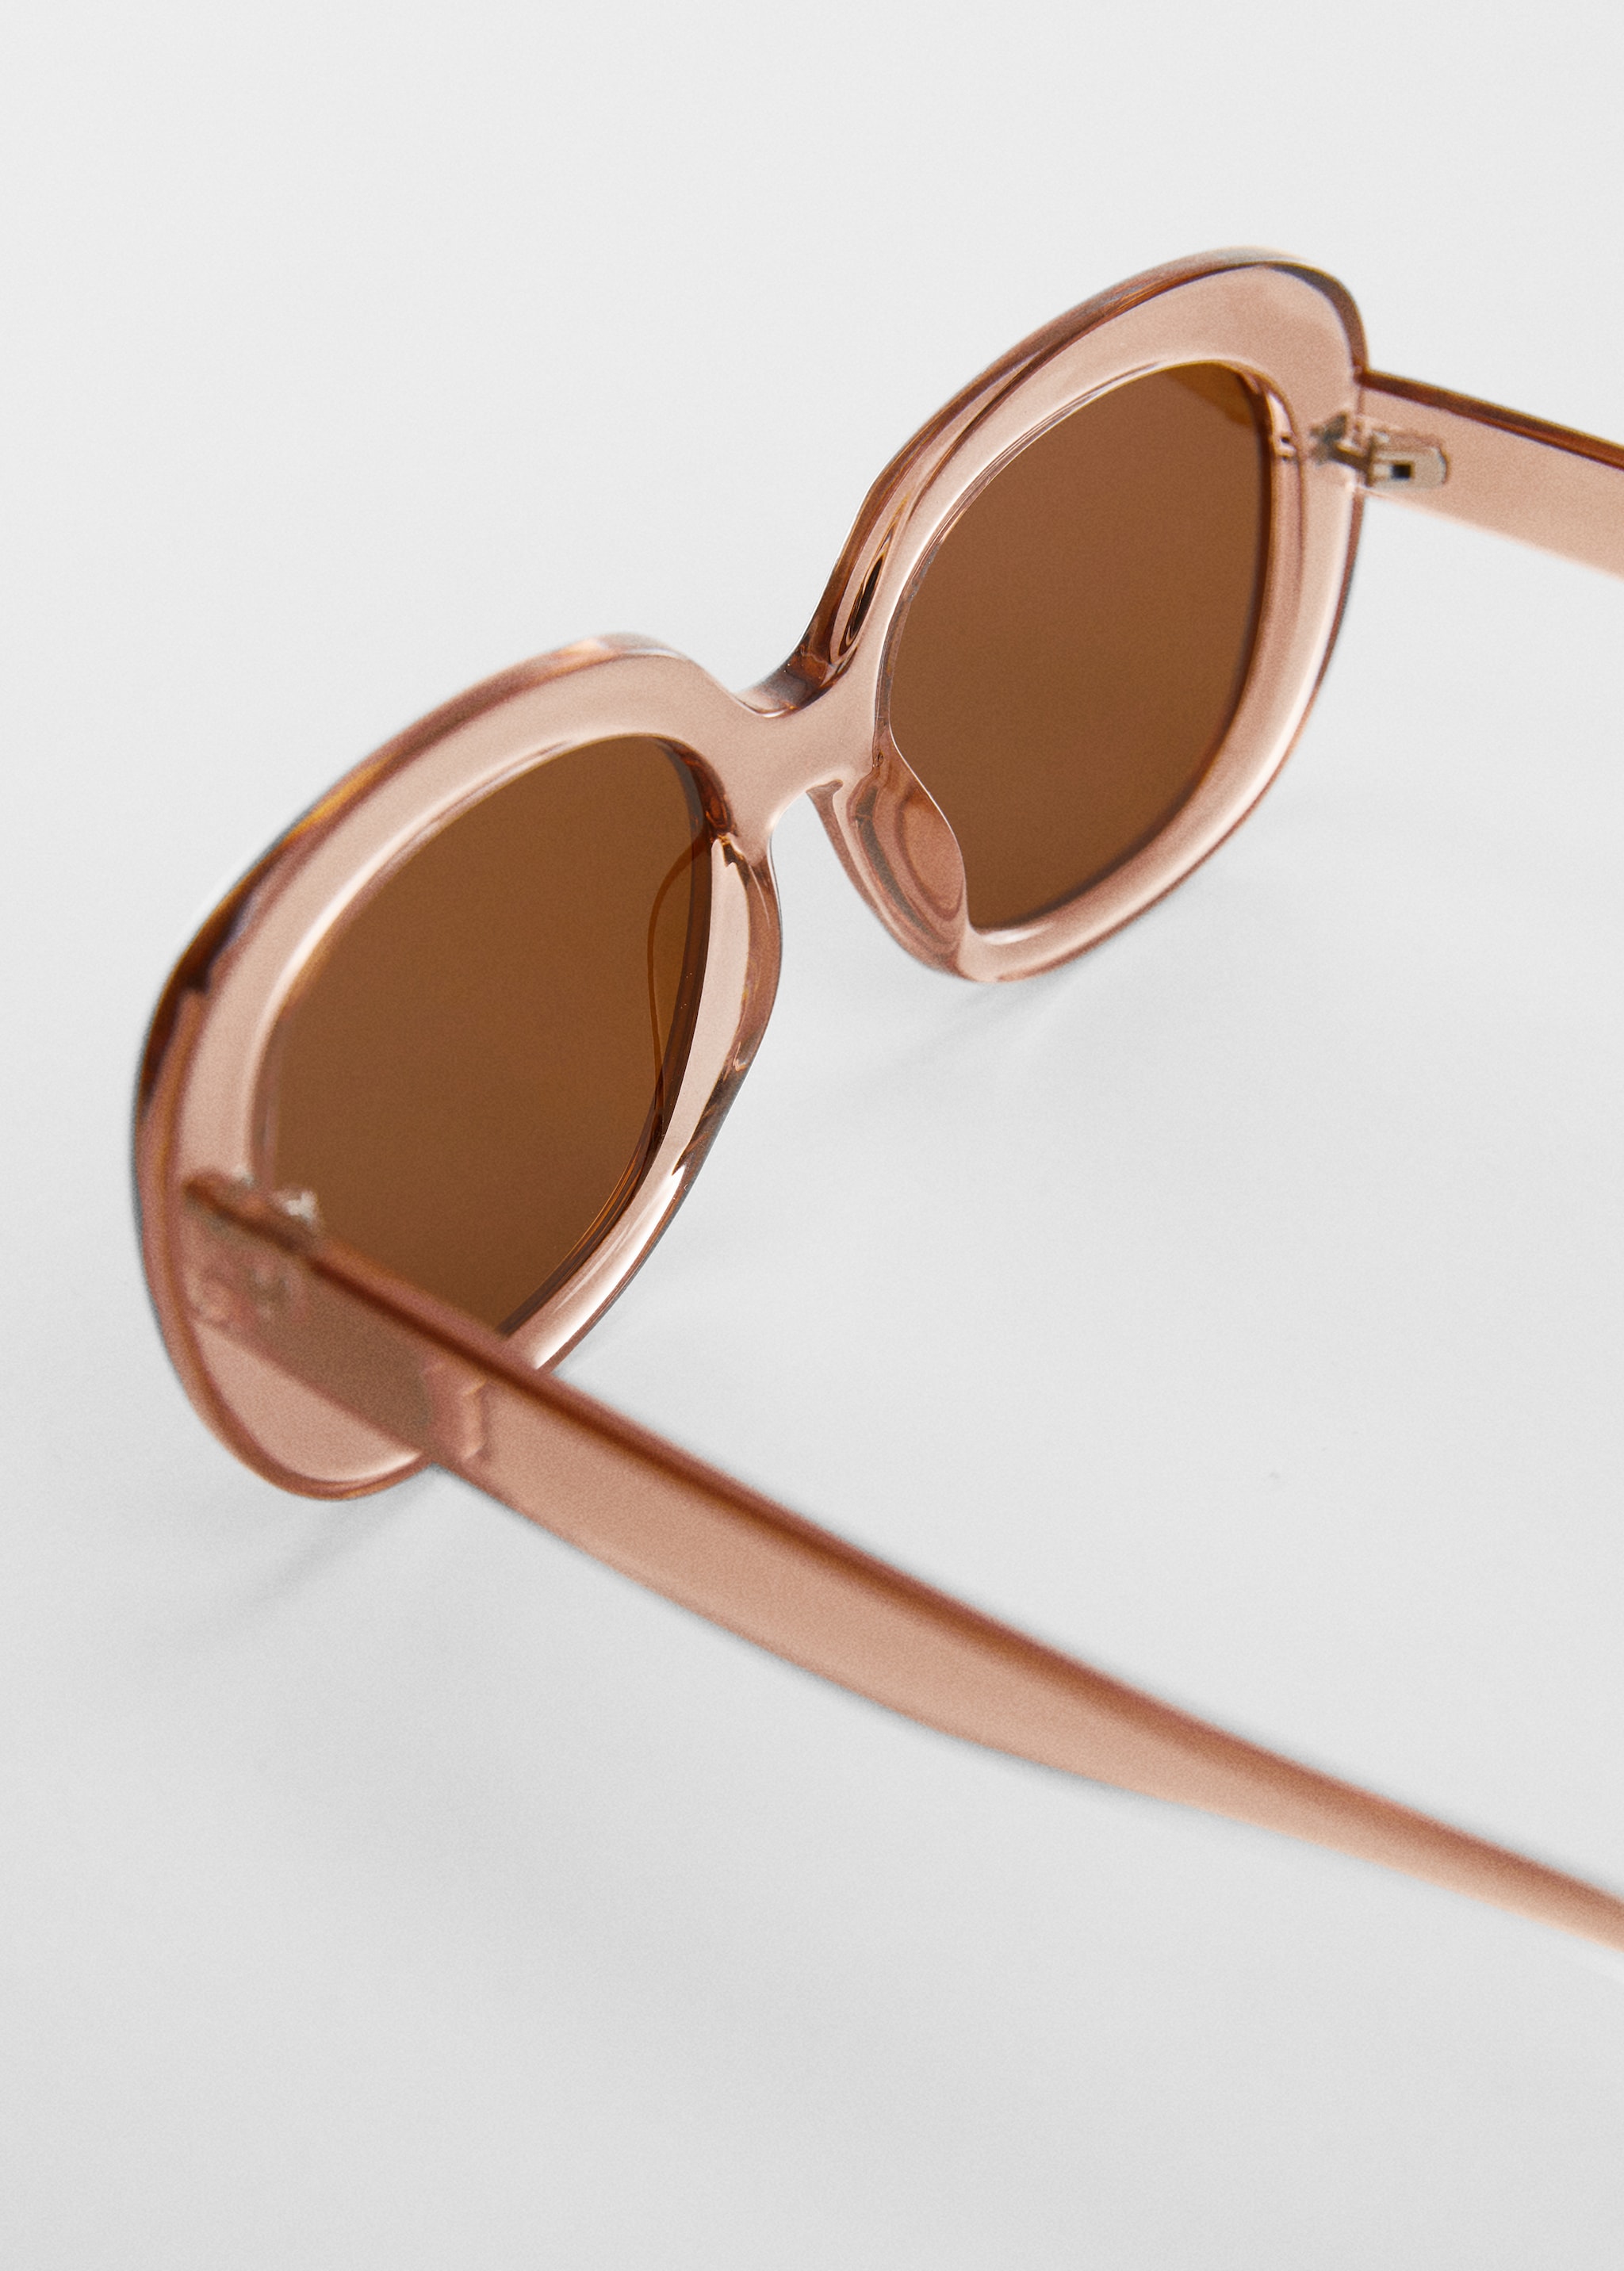 Maxi-frame sunglasses - Details of the article 1